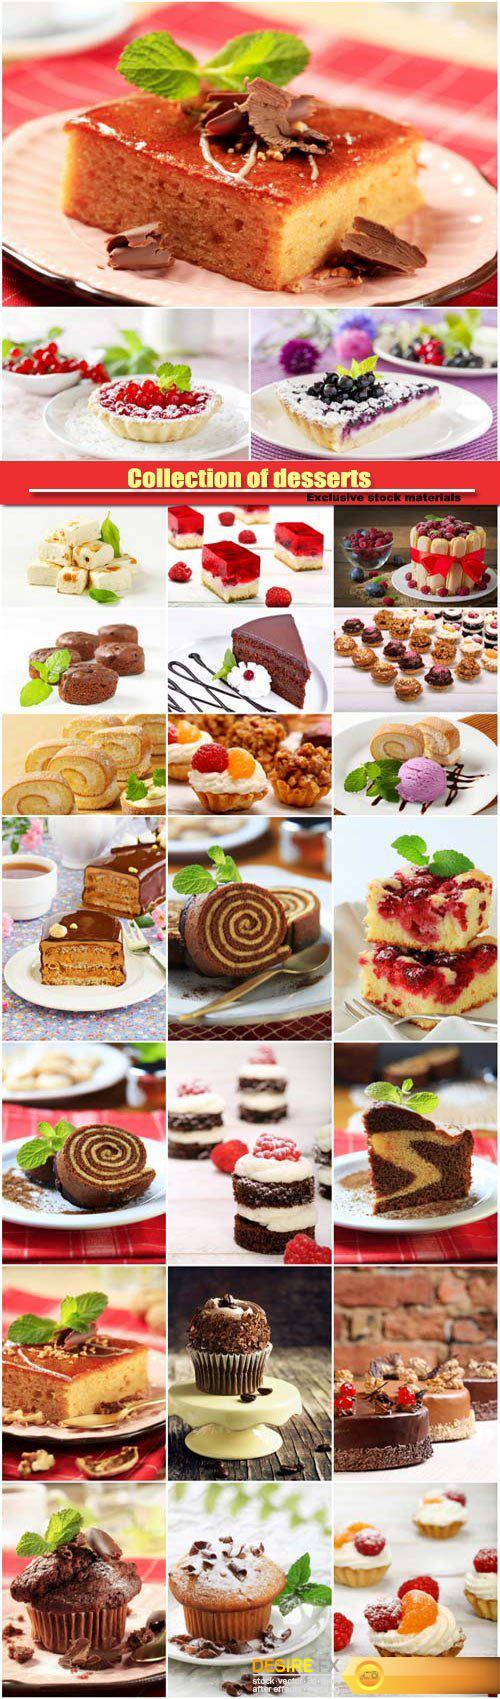 Collection of desserts, cakes and ice cream